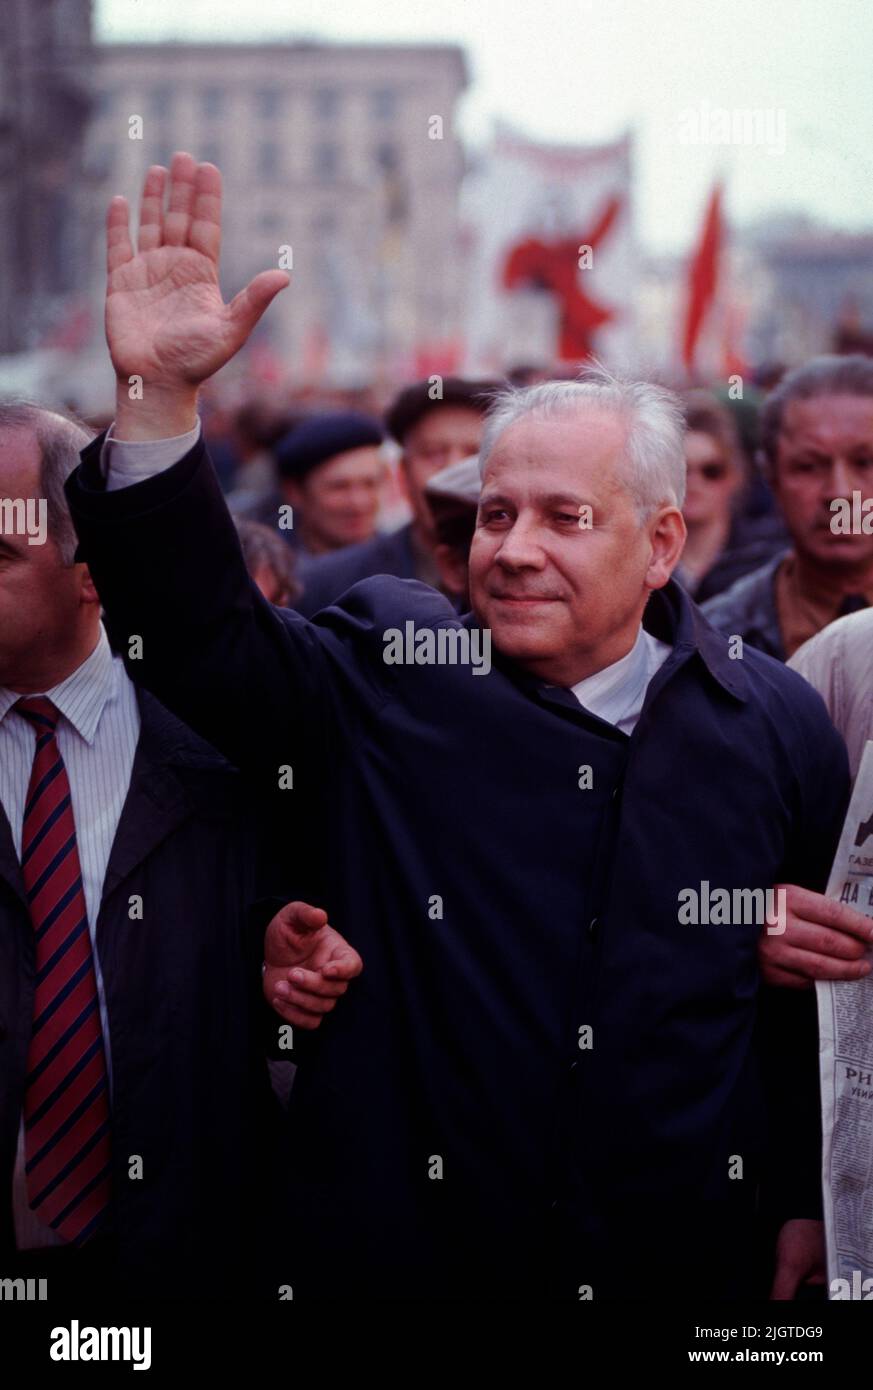 Anatoly Ivanovich Lukyanov ( Анатолий Иванович Лукьянов,1930 – 2019) Lukyanov waves to the crowd during a Pro-communist anti-Yeltsin demonstration in central Moscow, Russia, April 1992.  He was the Chairman of the Supreme Soviet of the USSR from 1990 to 1991 and was one of the founders of the Communist Party of the Russian Federation. Stock Photo